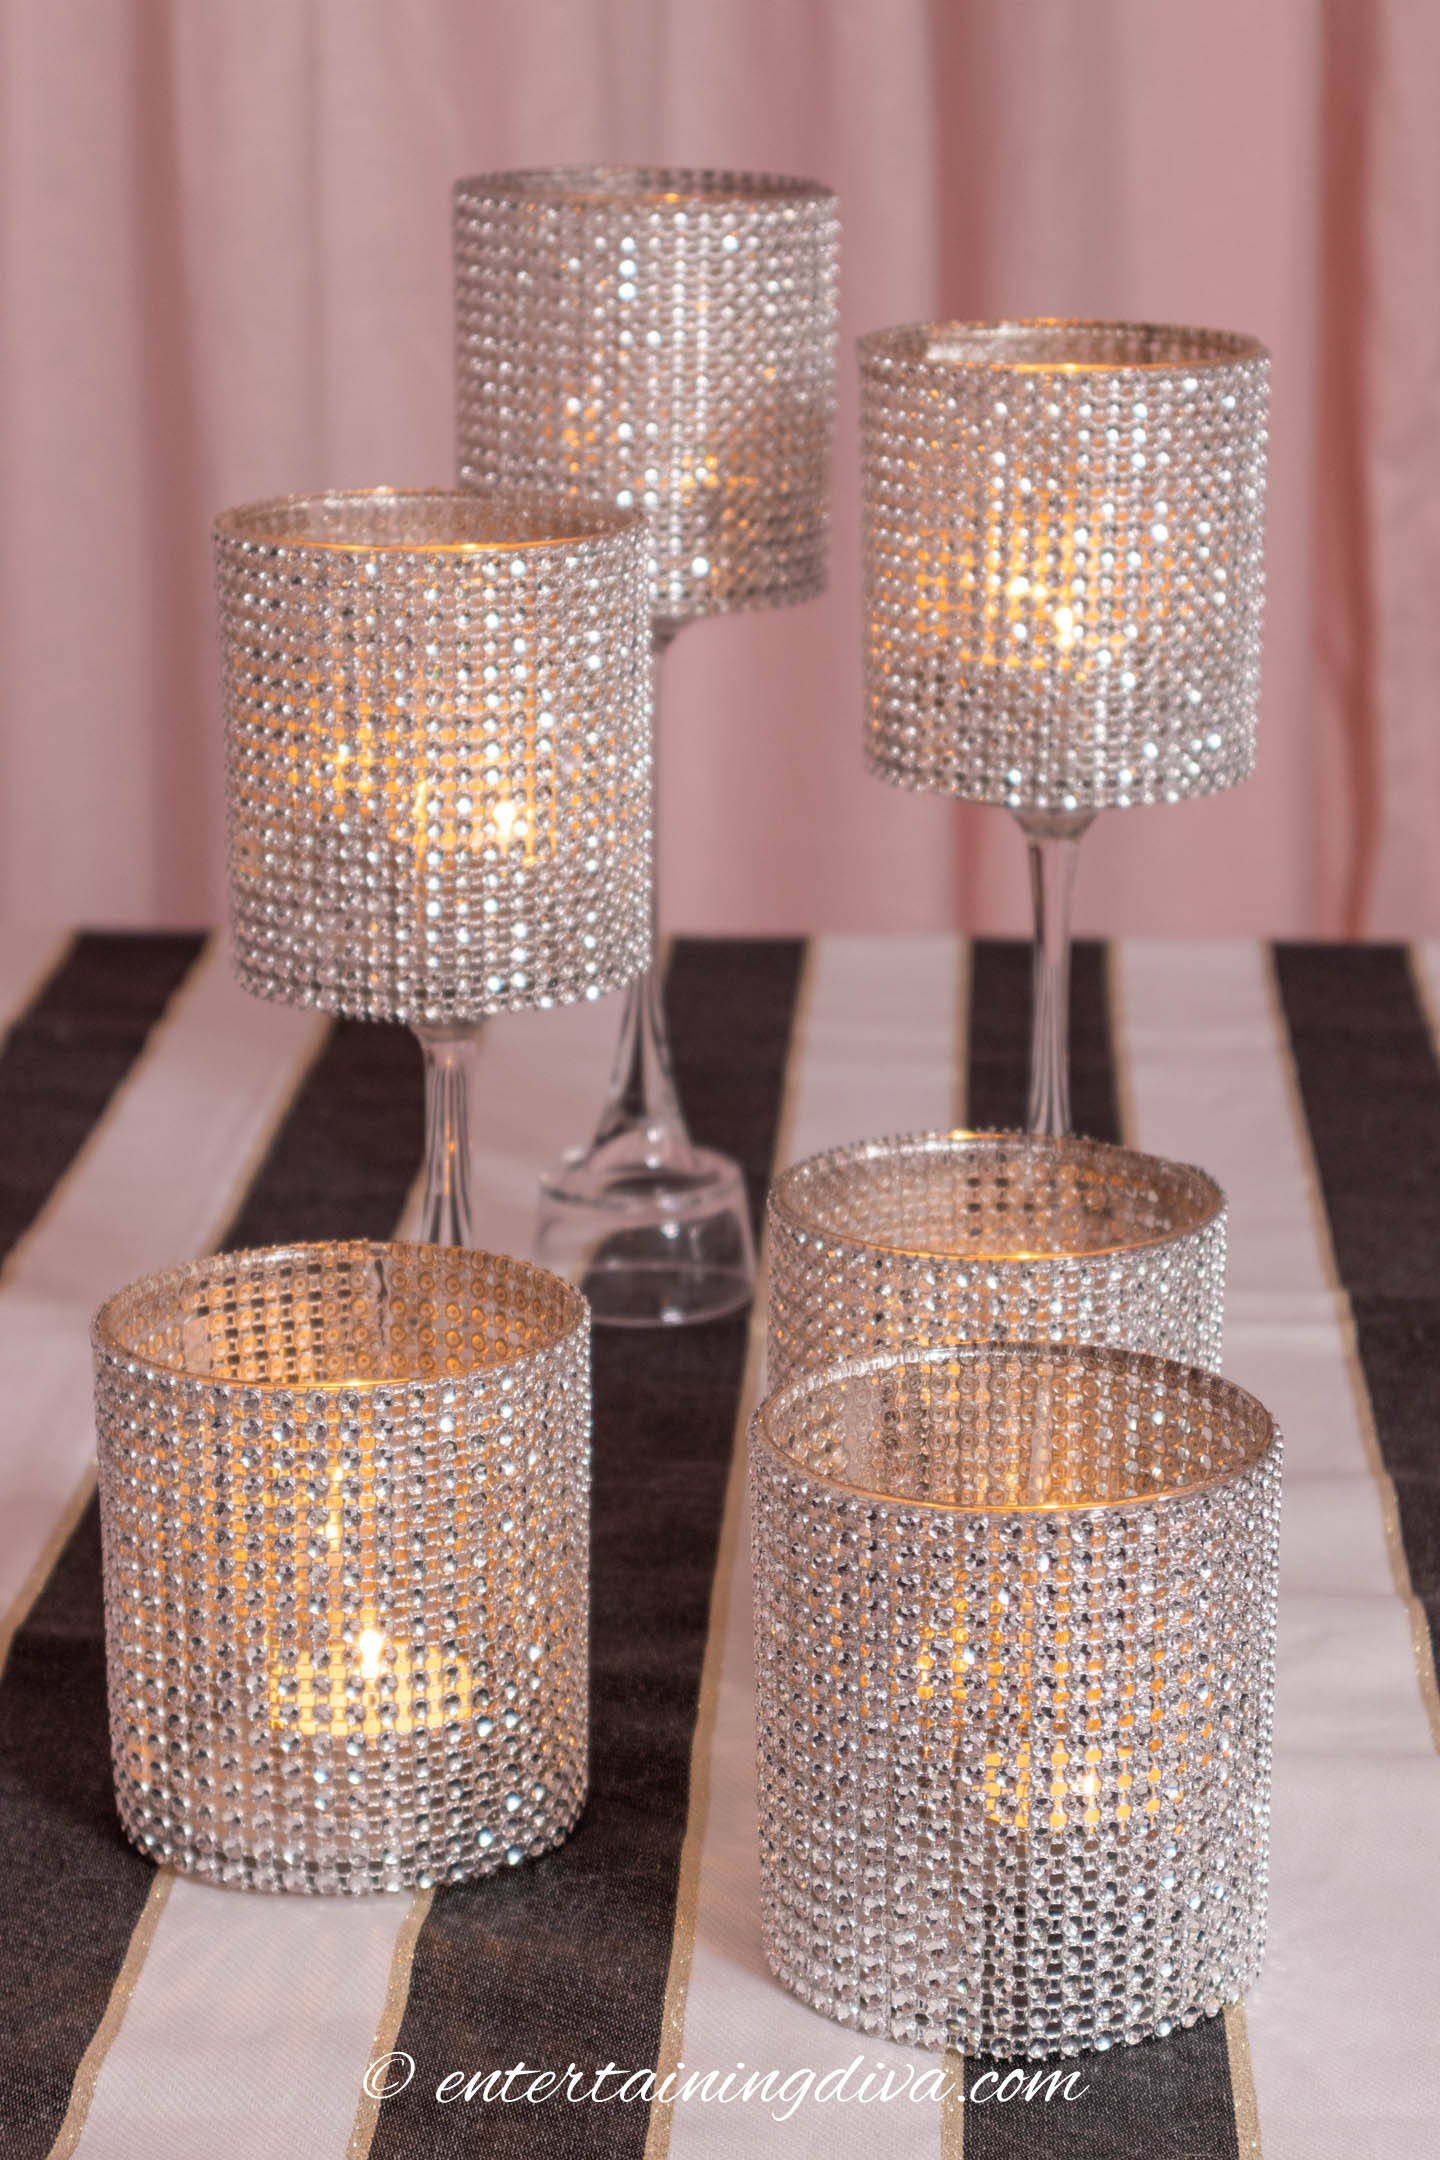 Both sizes of DIY glam candle holders